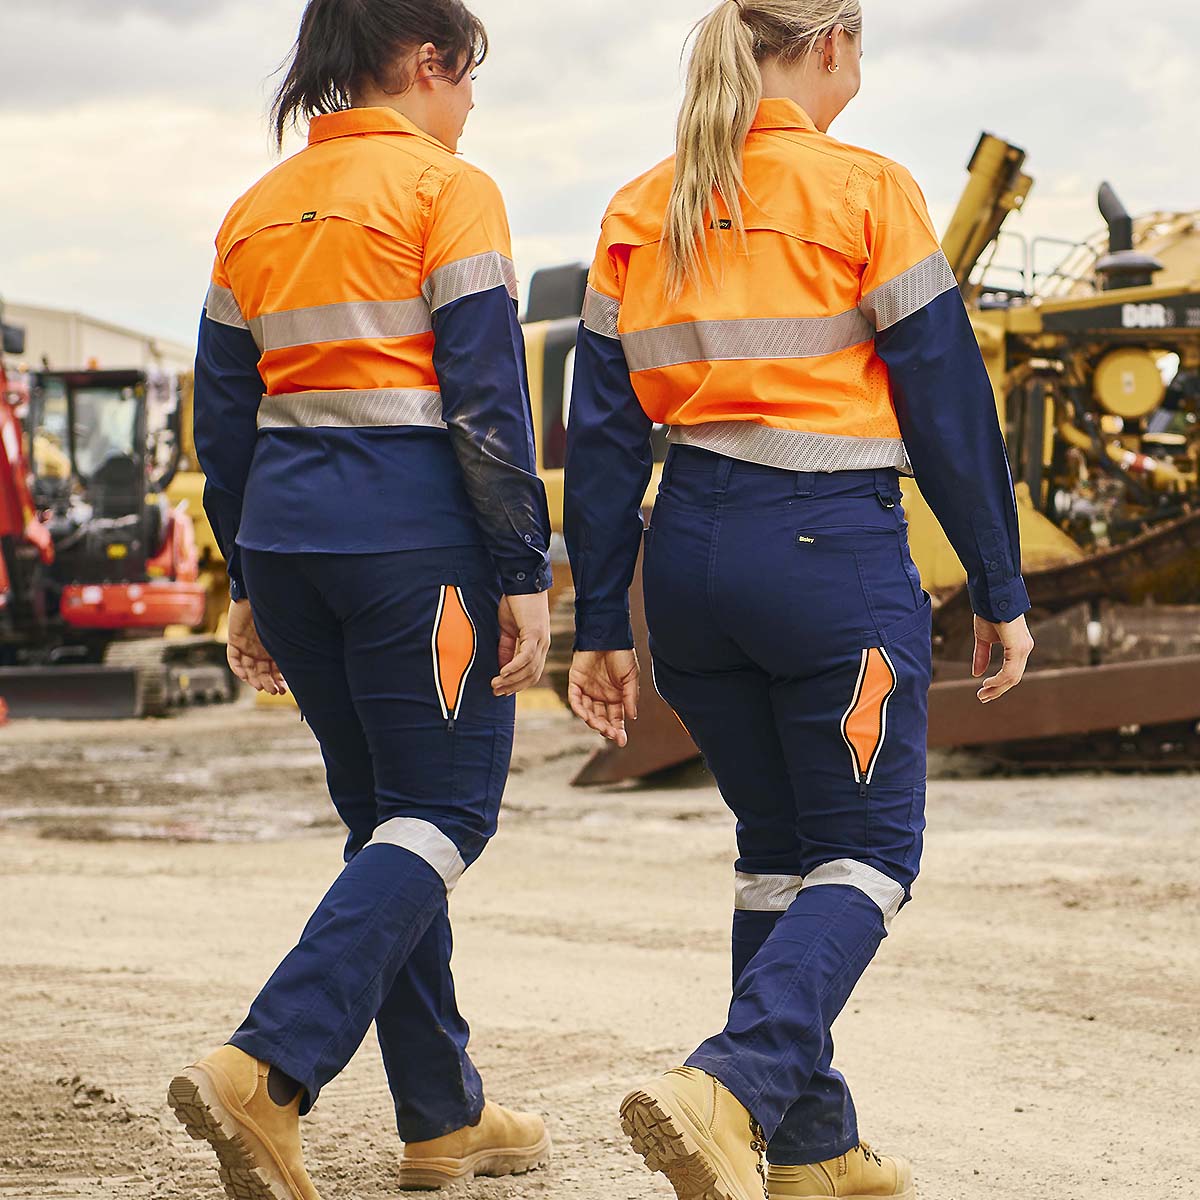 Tradie pants re designed to protect you against certain workplace hazards like flames and cuts from sharp objects.